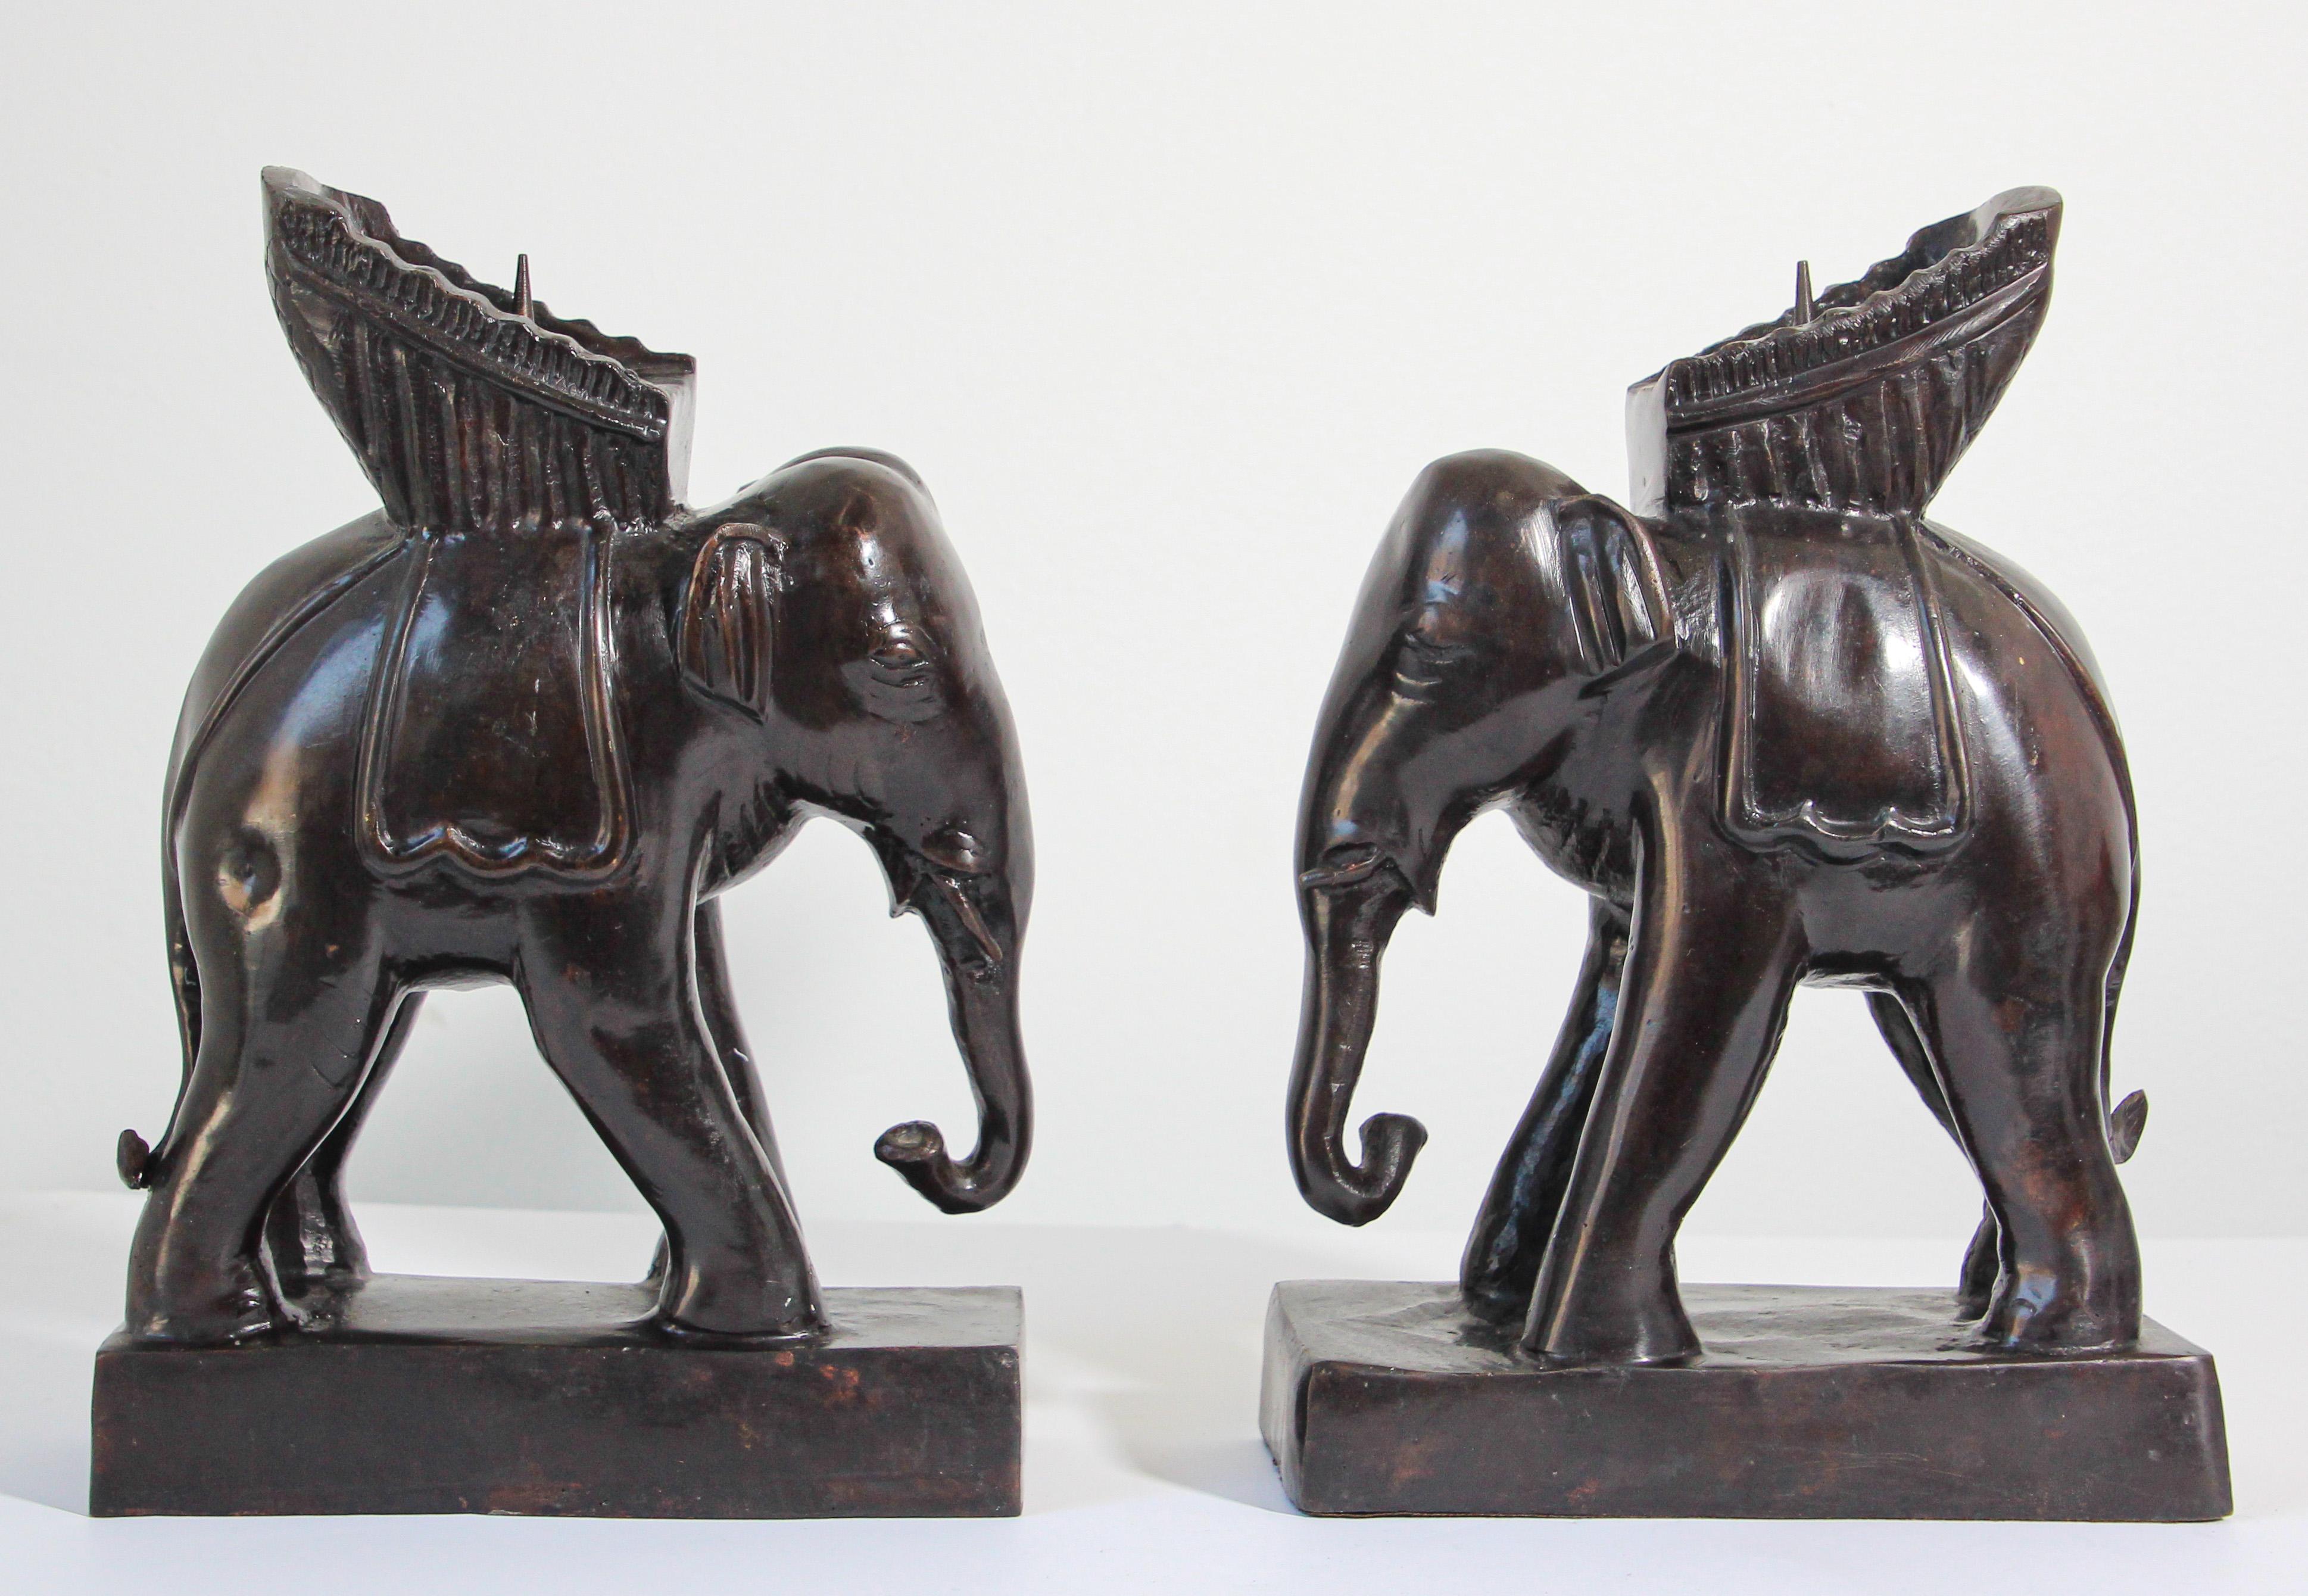 Pair of Maitland Smith elephant candlesticks
Pair of bronze elephant vintage Maitland-smith candlesticks.
Pair of Maitland Smith elephant candlesticks, a compliment to your dining or console table. 
Elephants bring good luck and good health with